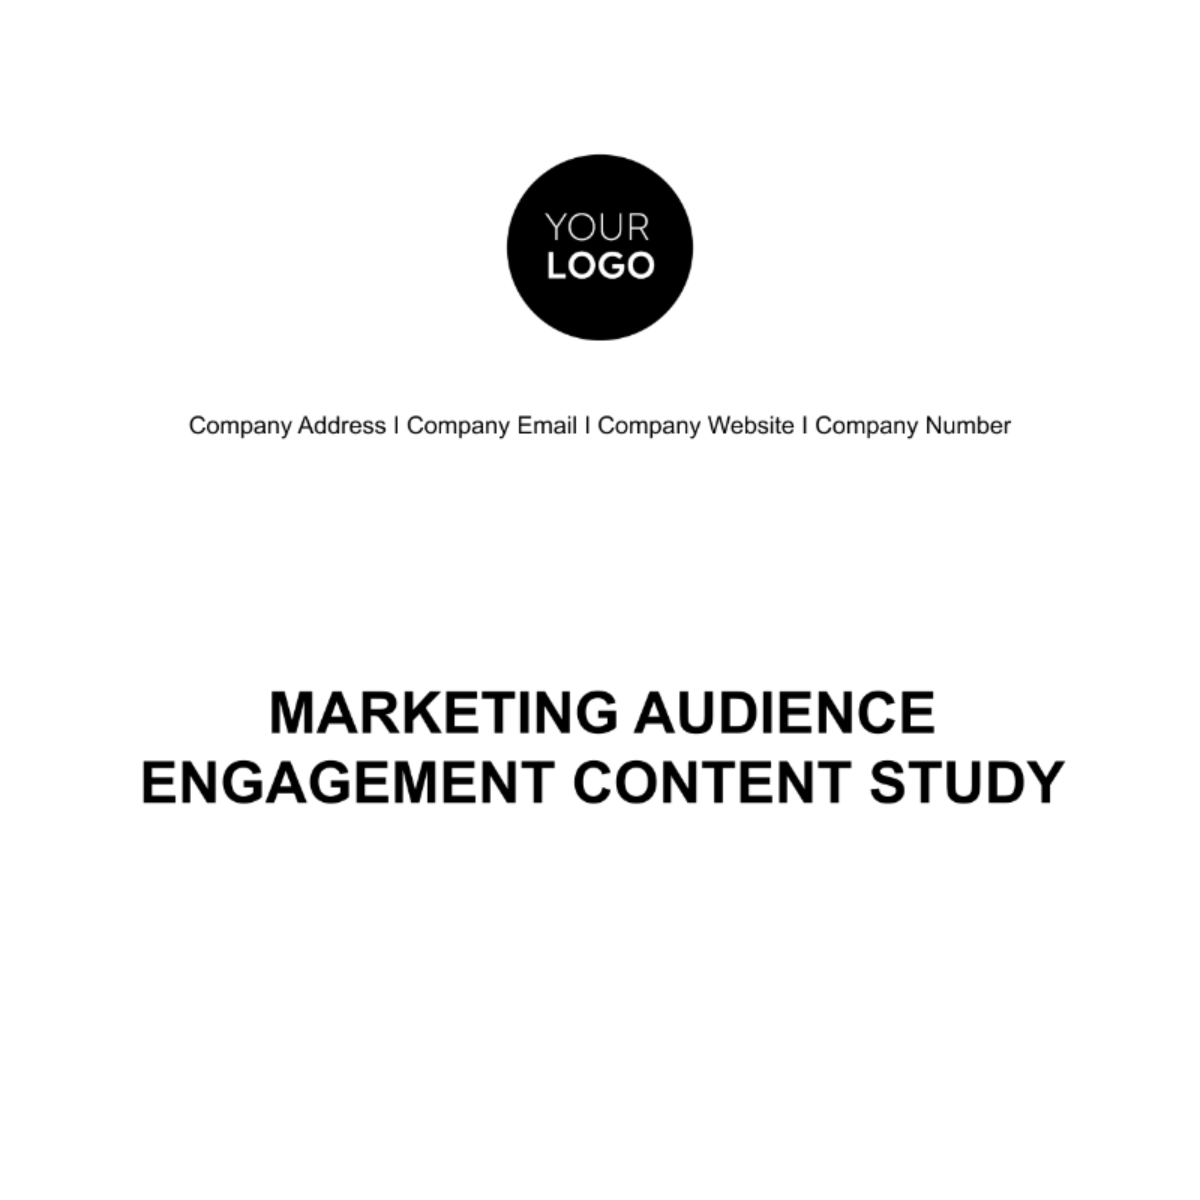 Marketing Audience Engagement Content Study Template